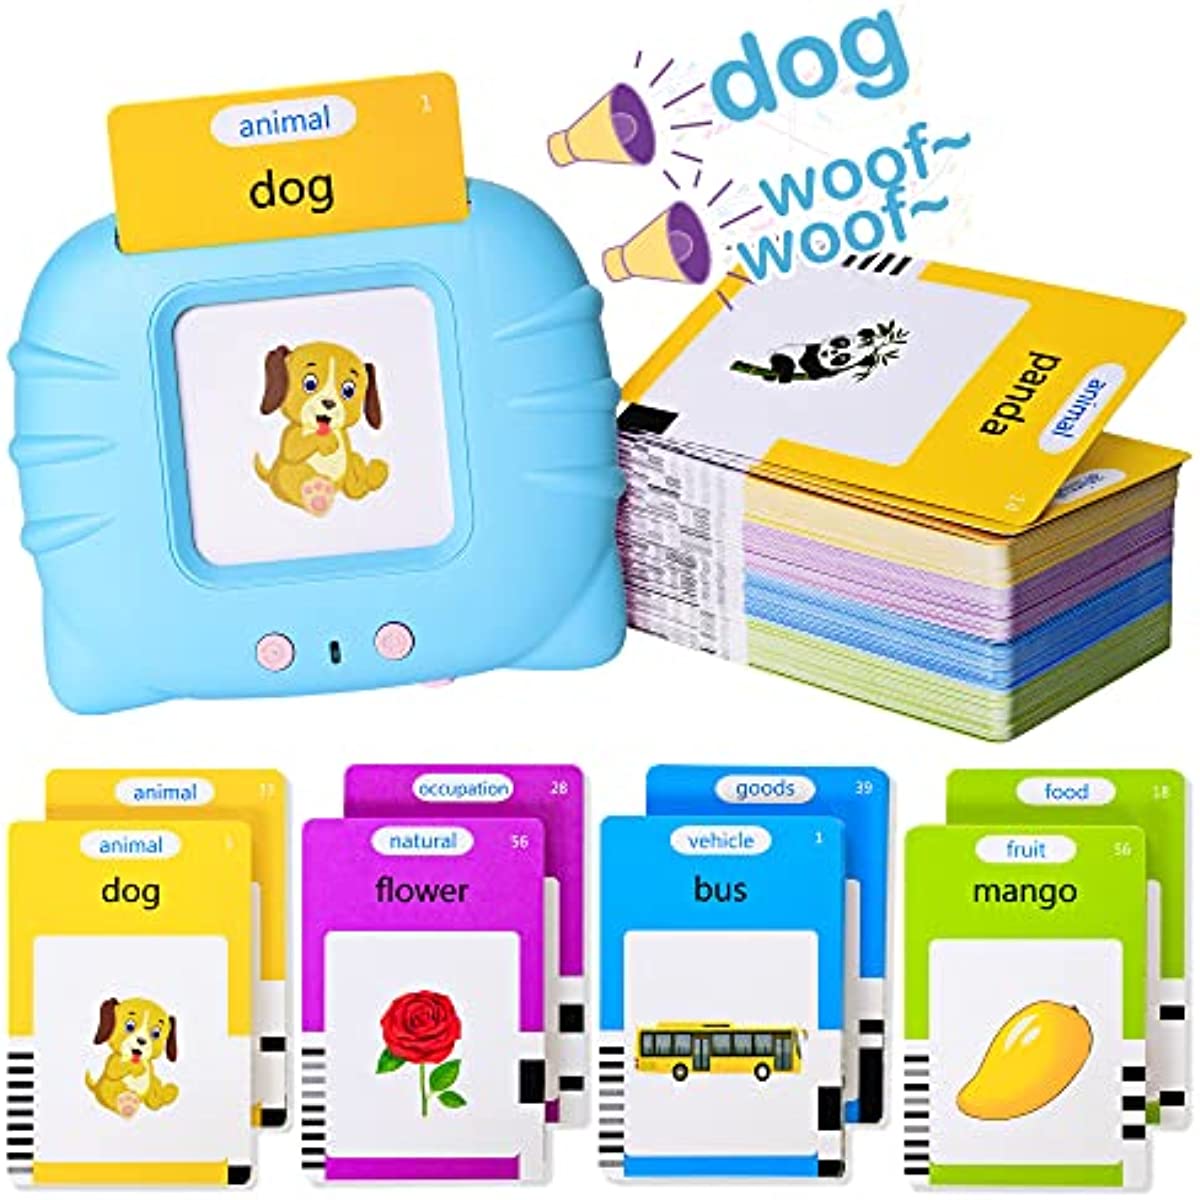 The Mum Shop AU -Learn-to-talk Flash Cards for Toddlers with Reader